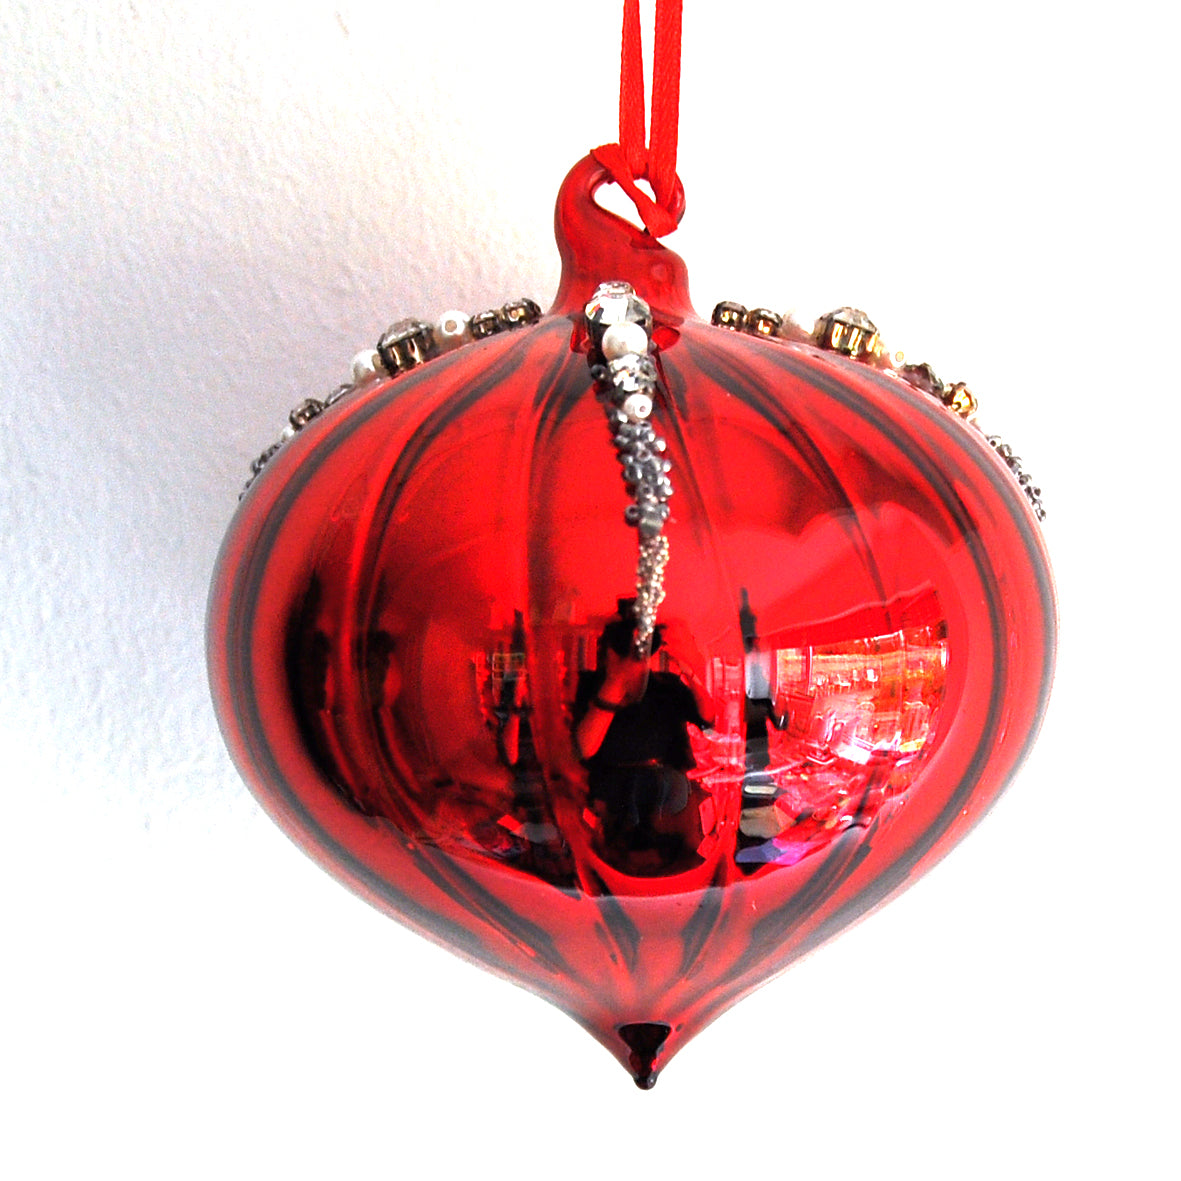 This red mirror droplet shape Christmas ornament is made from glass and decorated with beads, pearls and diamonte.